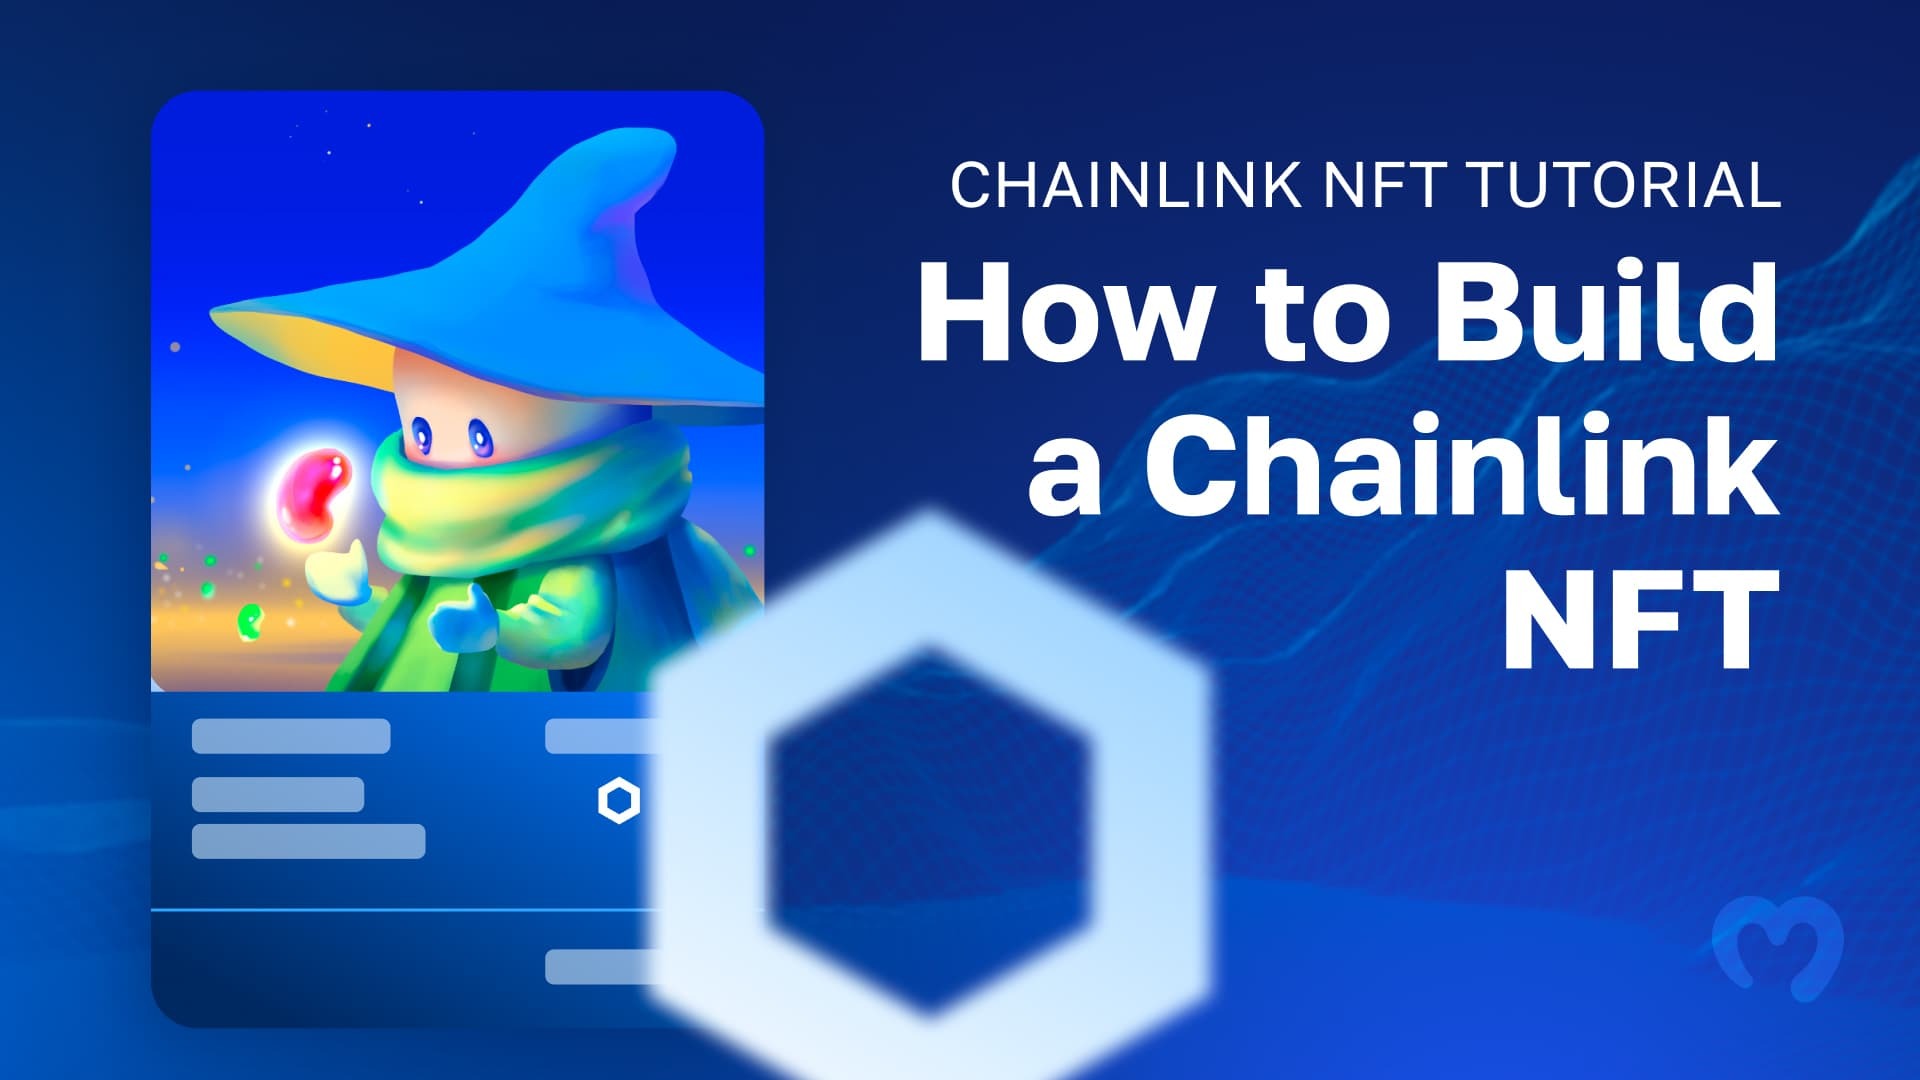 Chainlink NFT Tutorial - How to Build a Chainlink NFT